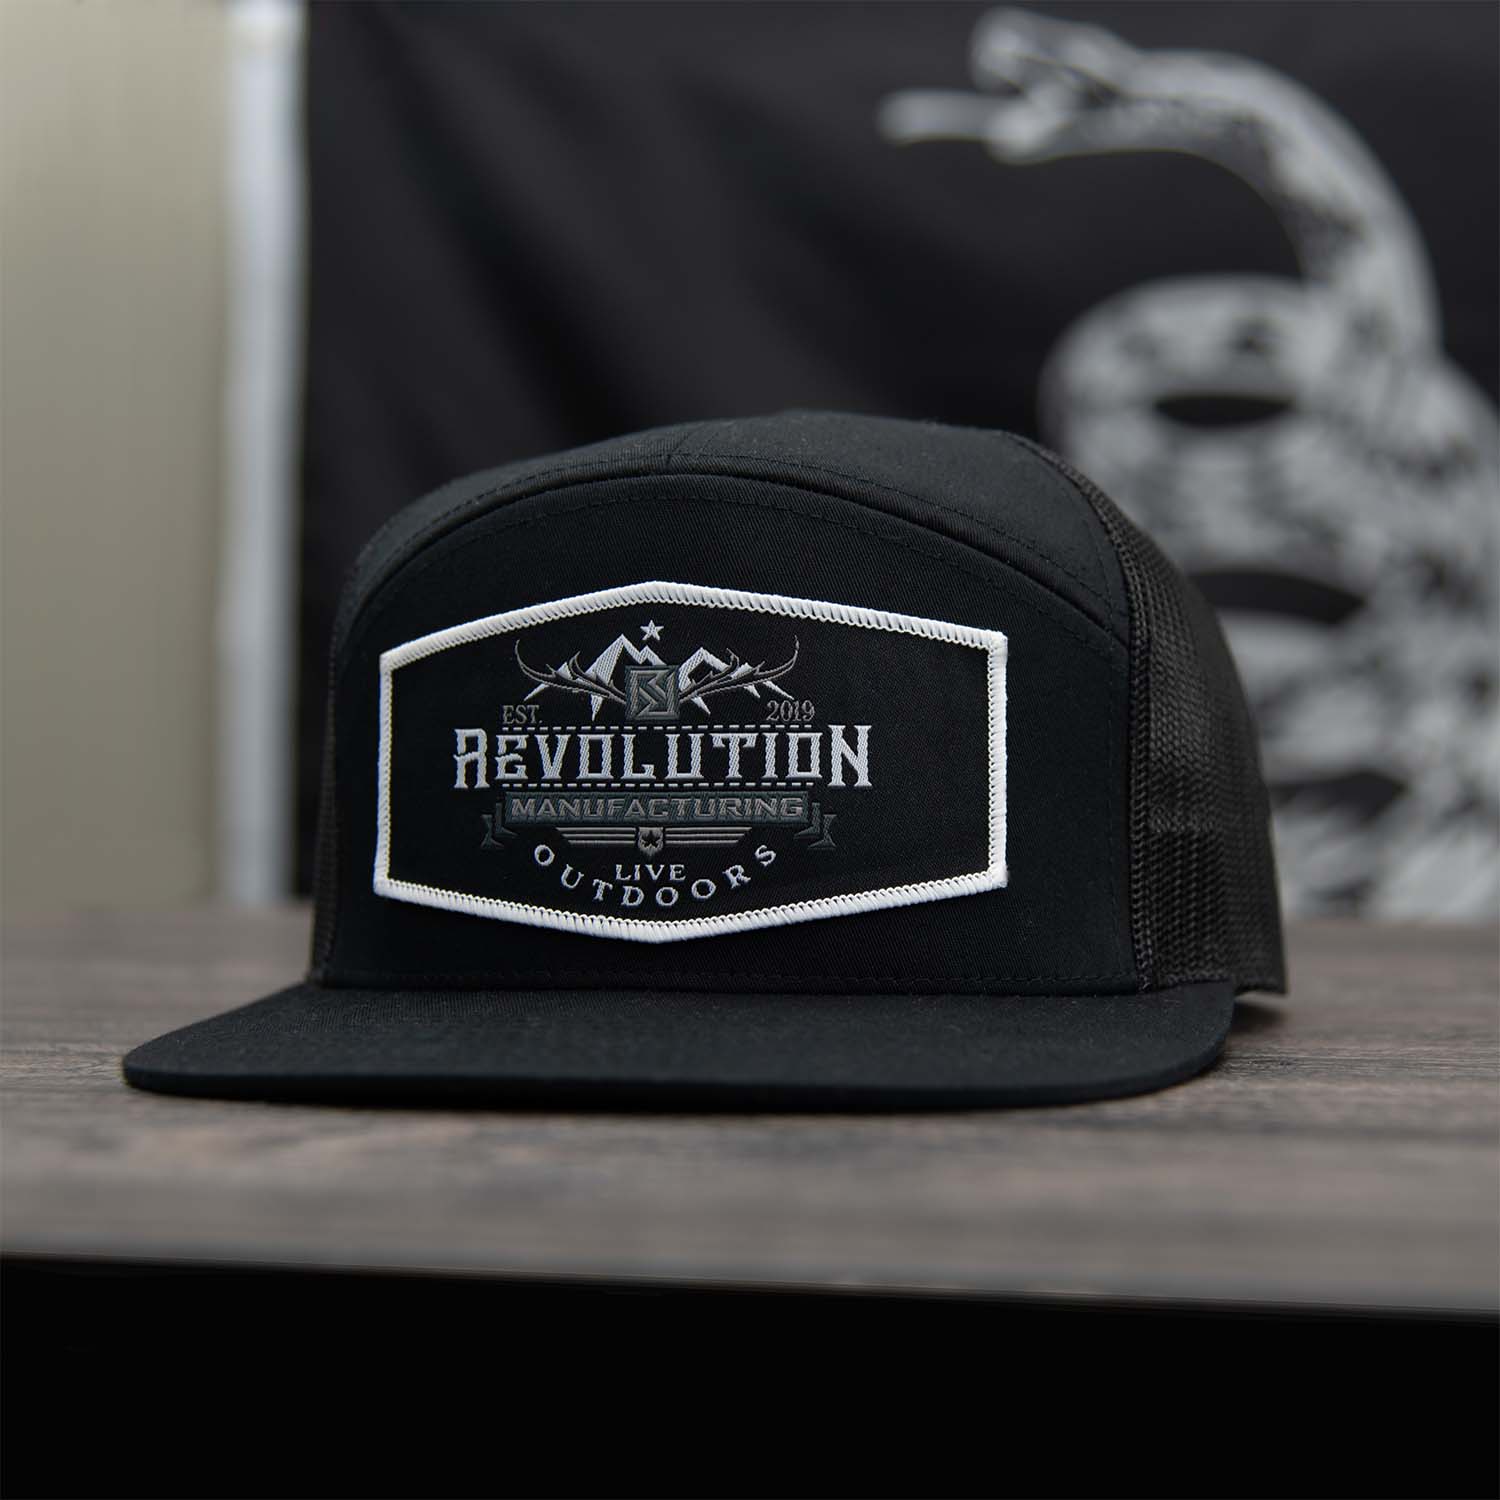 All black 7 panel flat bill trucker hat with Revolution Mfg Live Outdoors woven black patch with white border